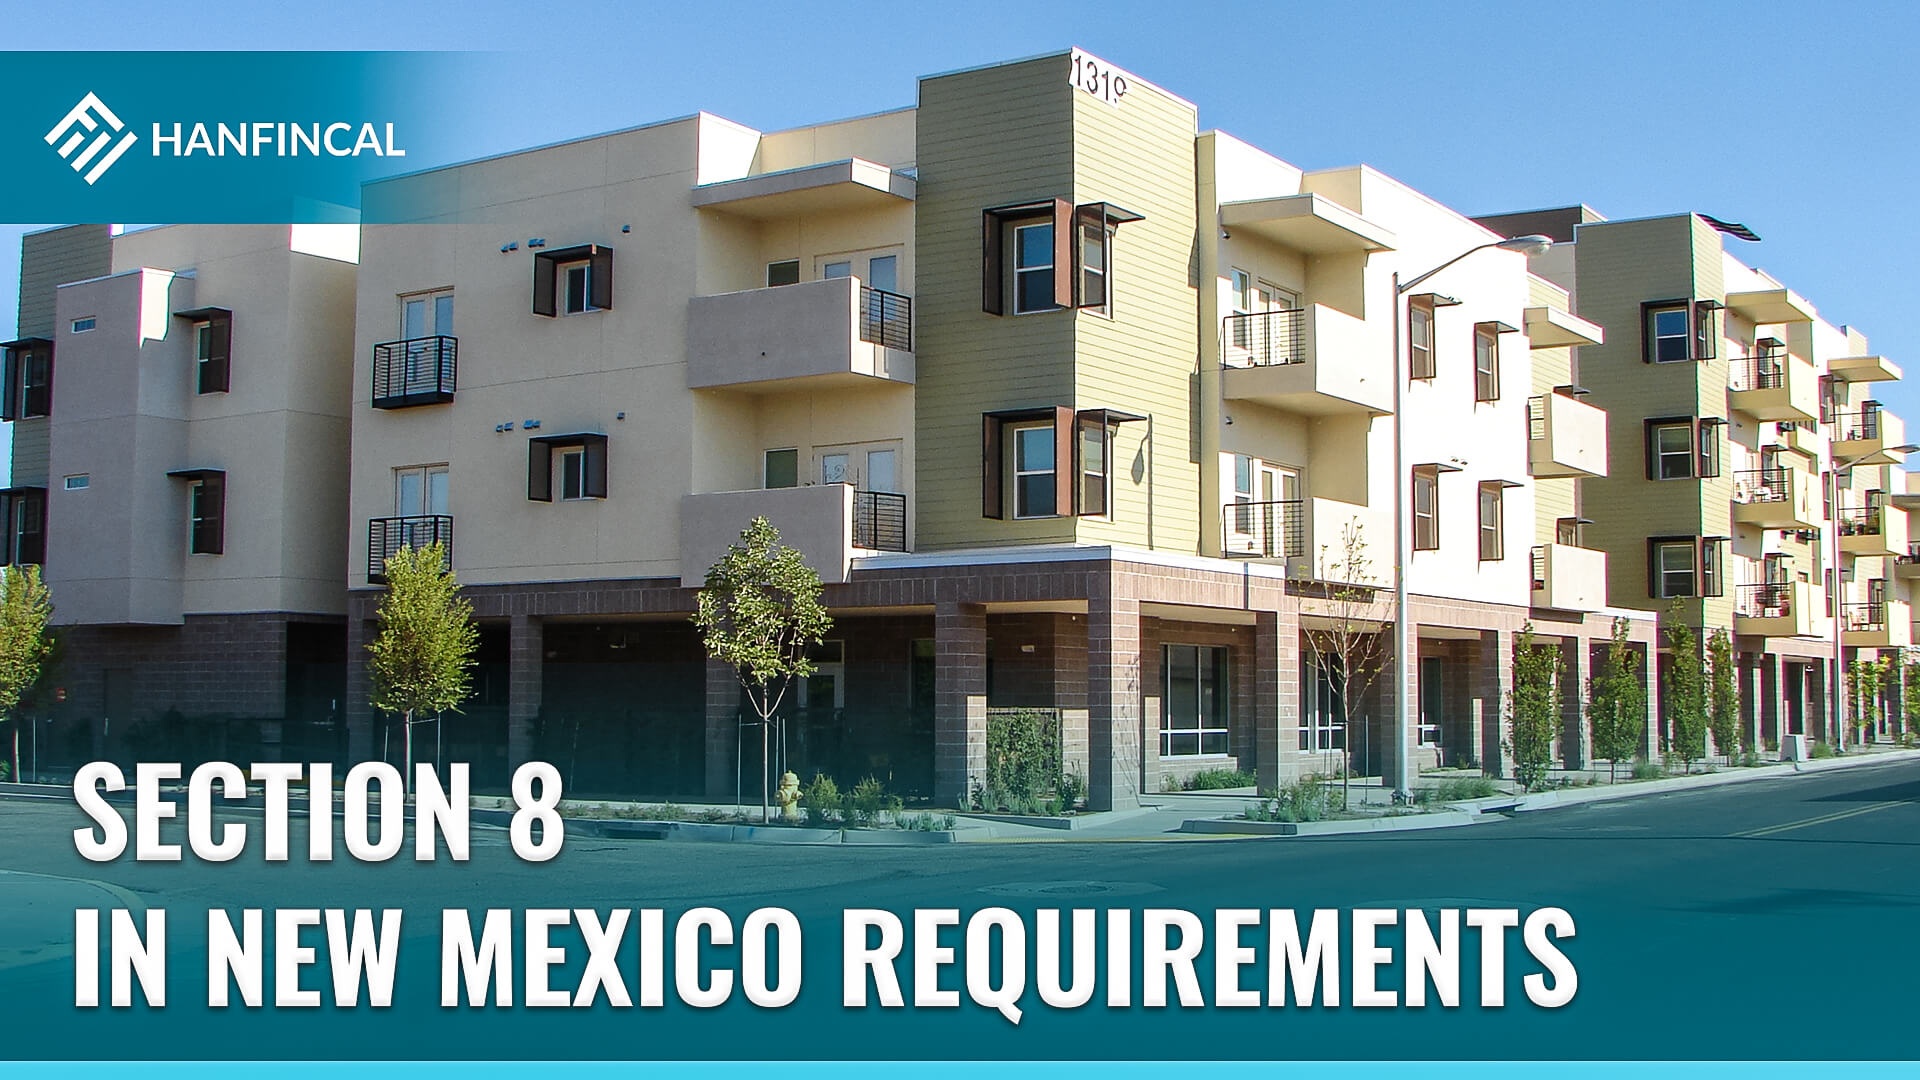 How To Apply For Section 8 In New Mexico?